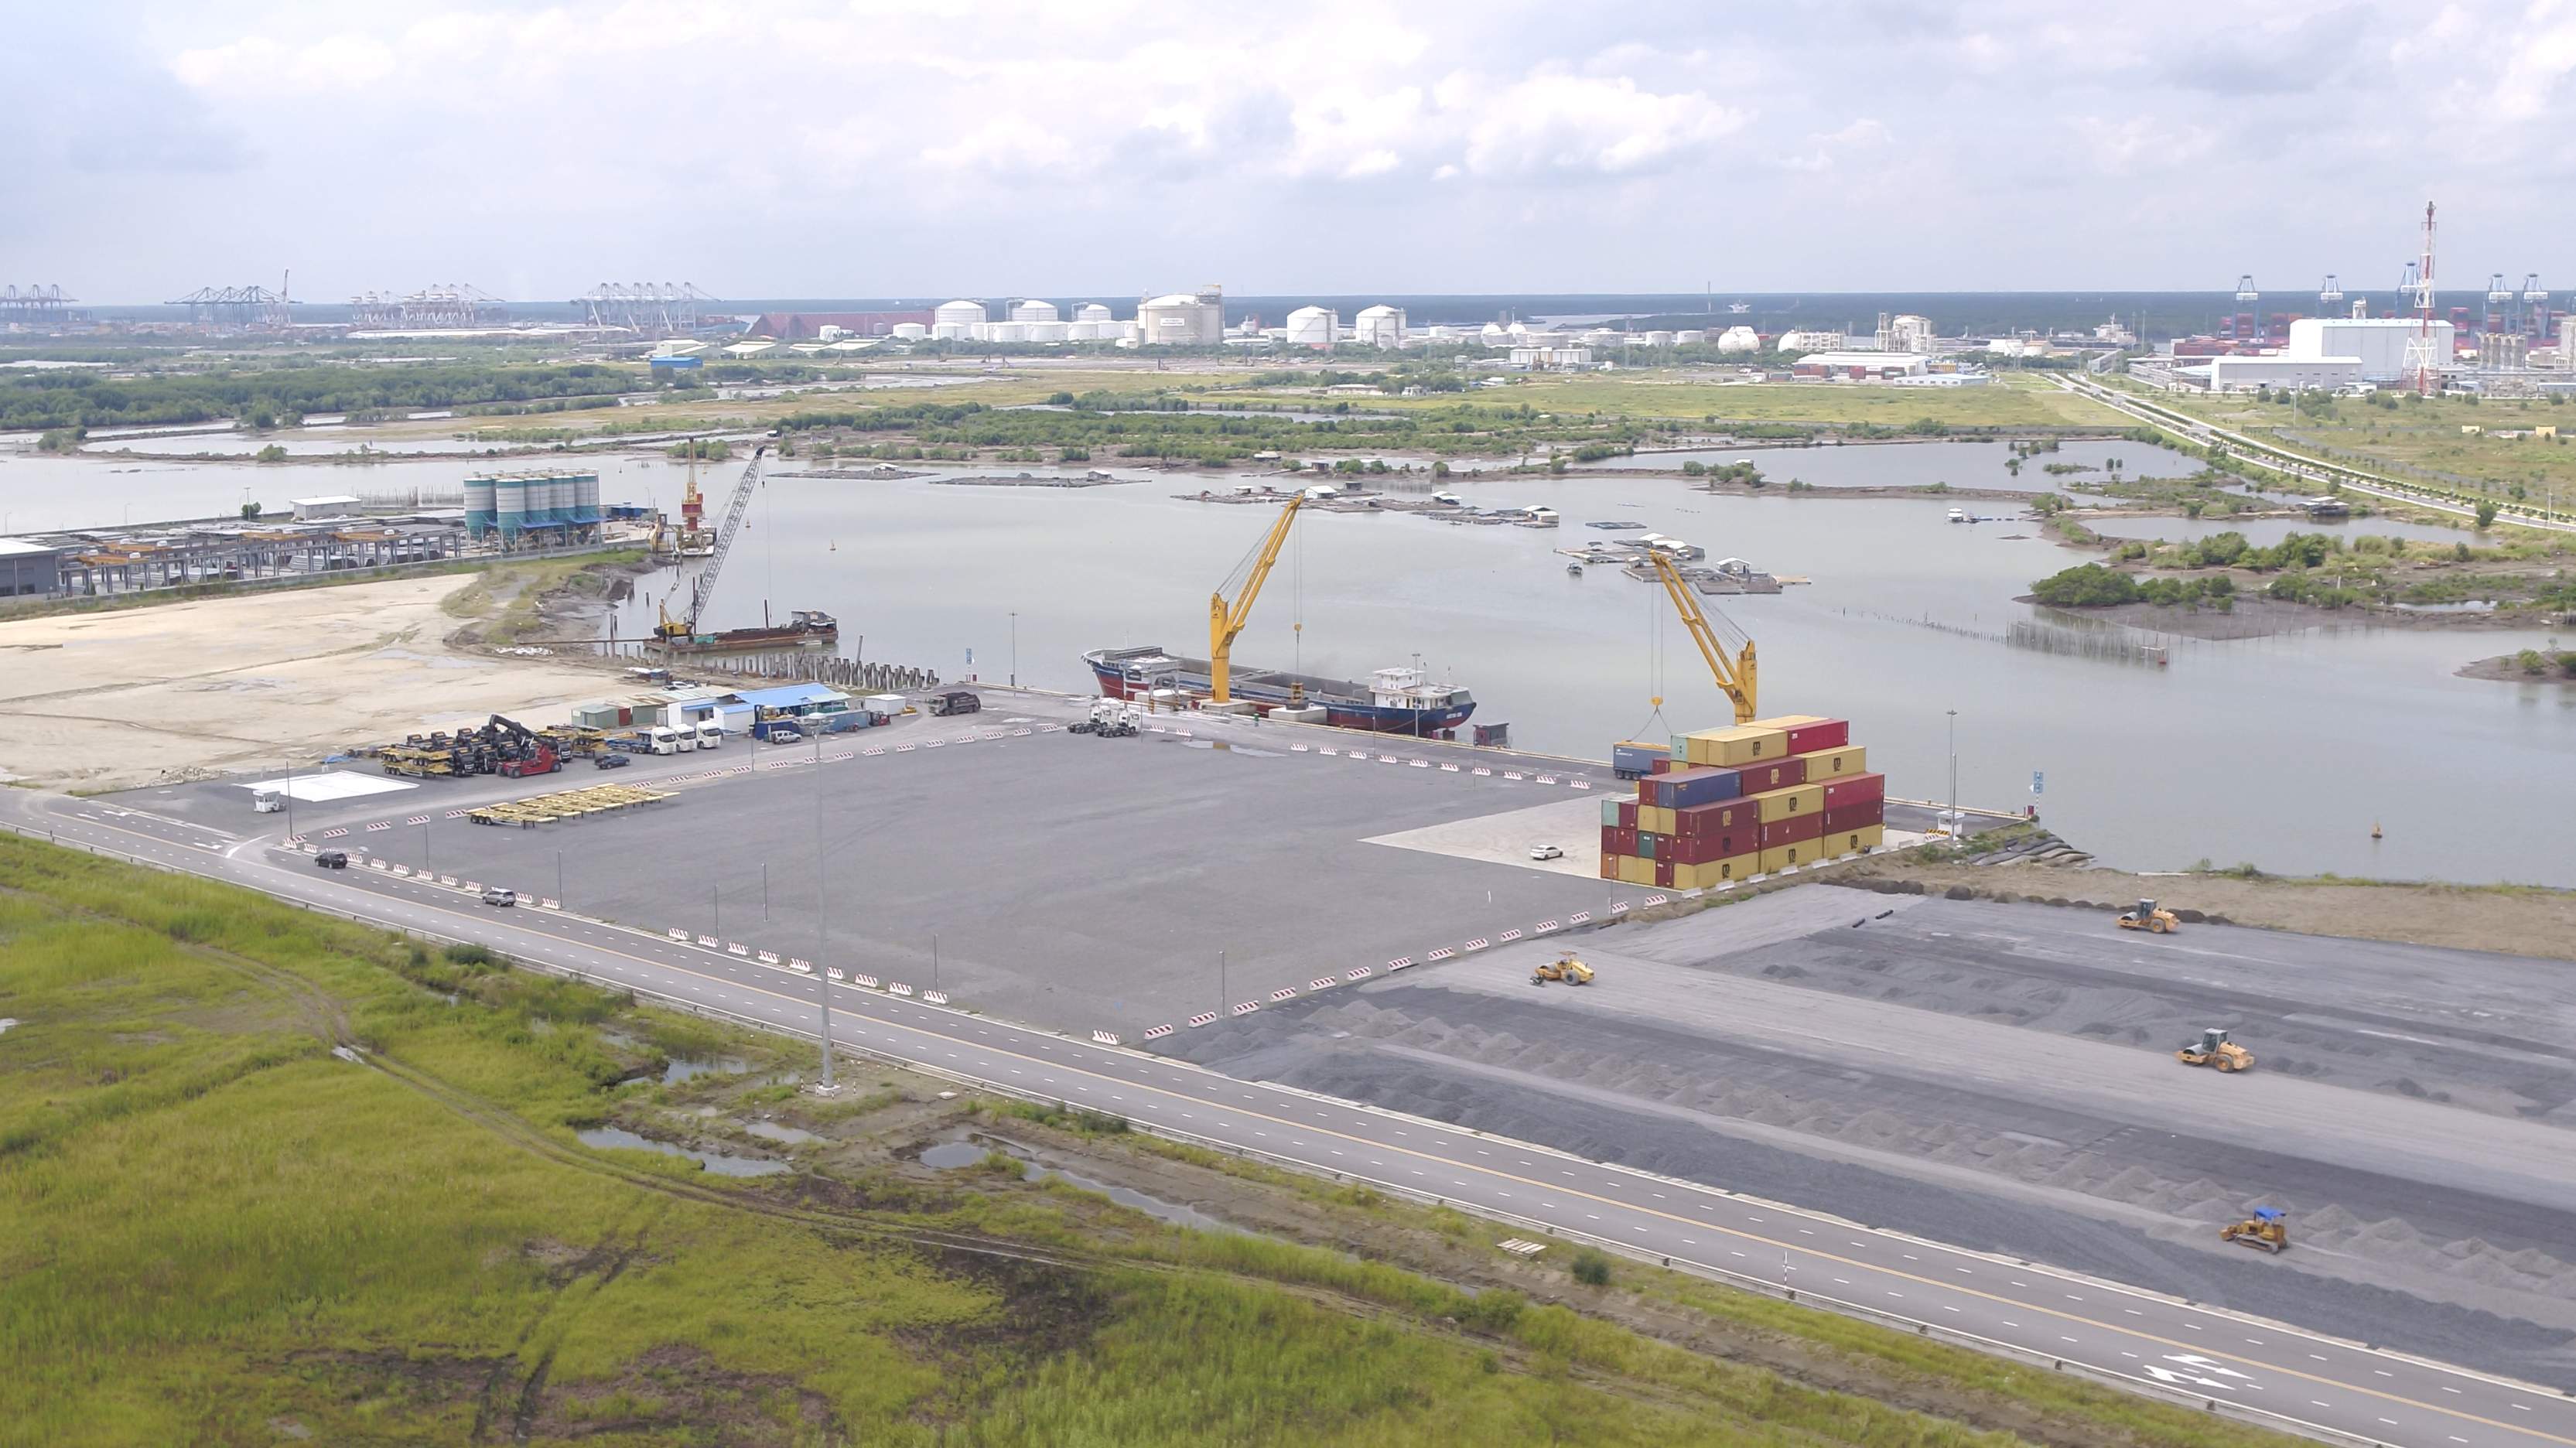 Phu My Dry Port - A piece of the puzzle to complete the logistics